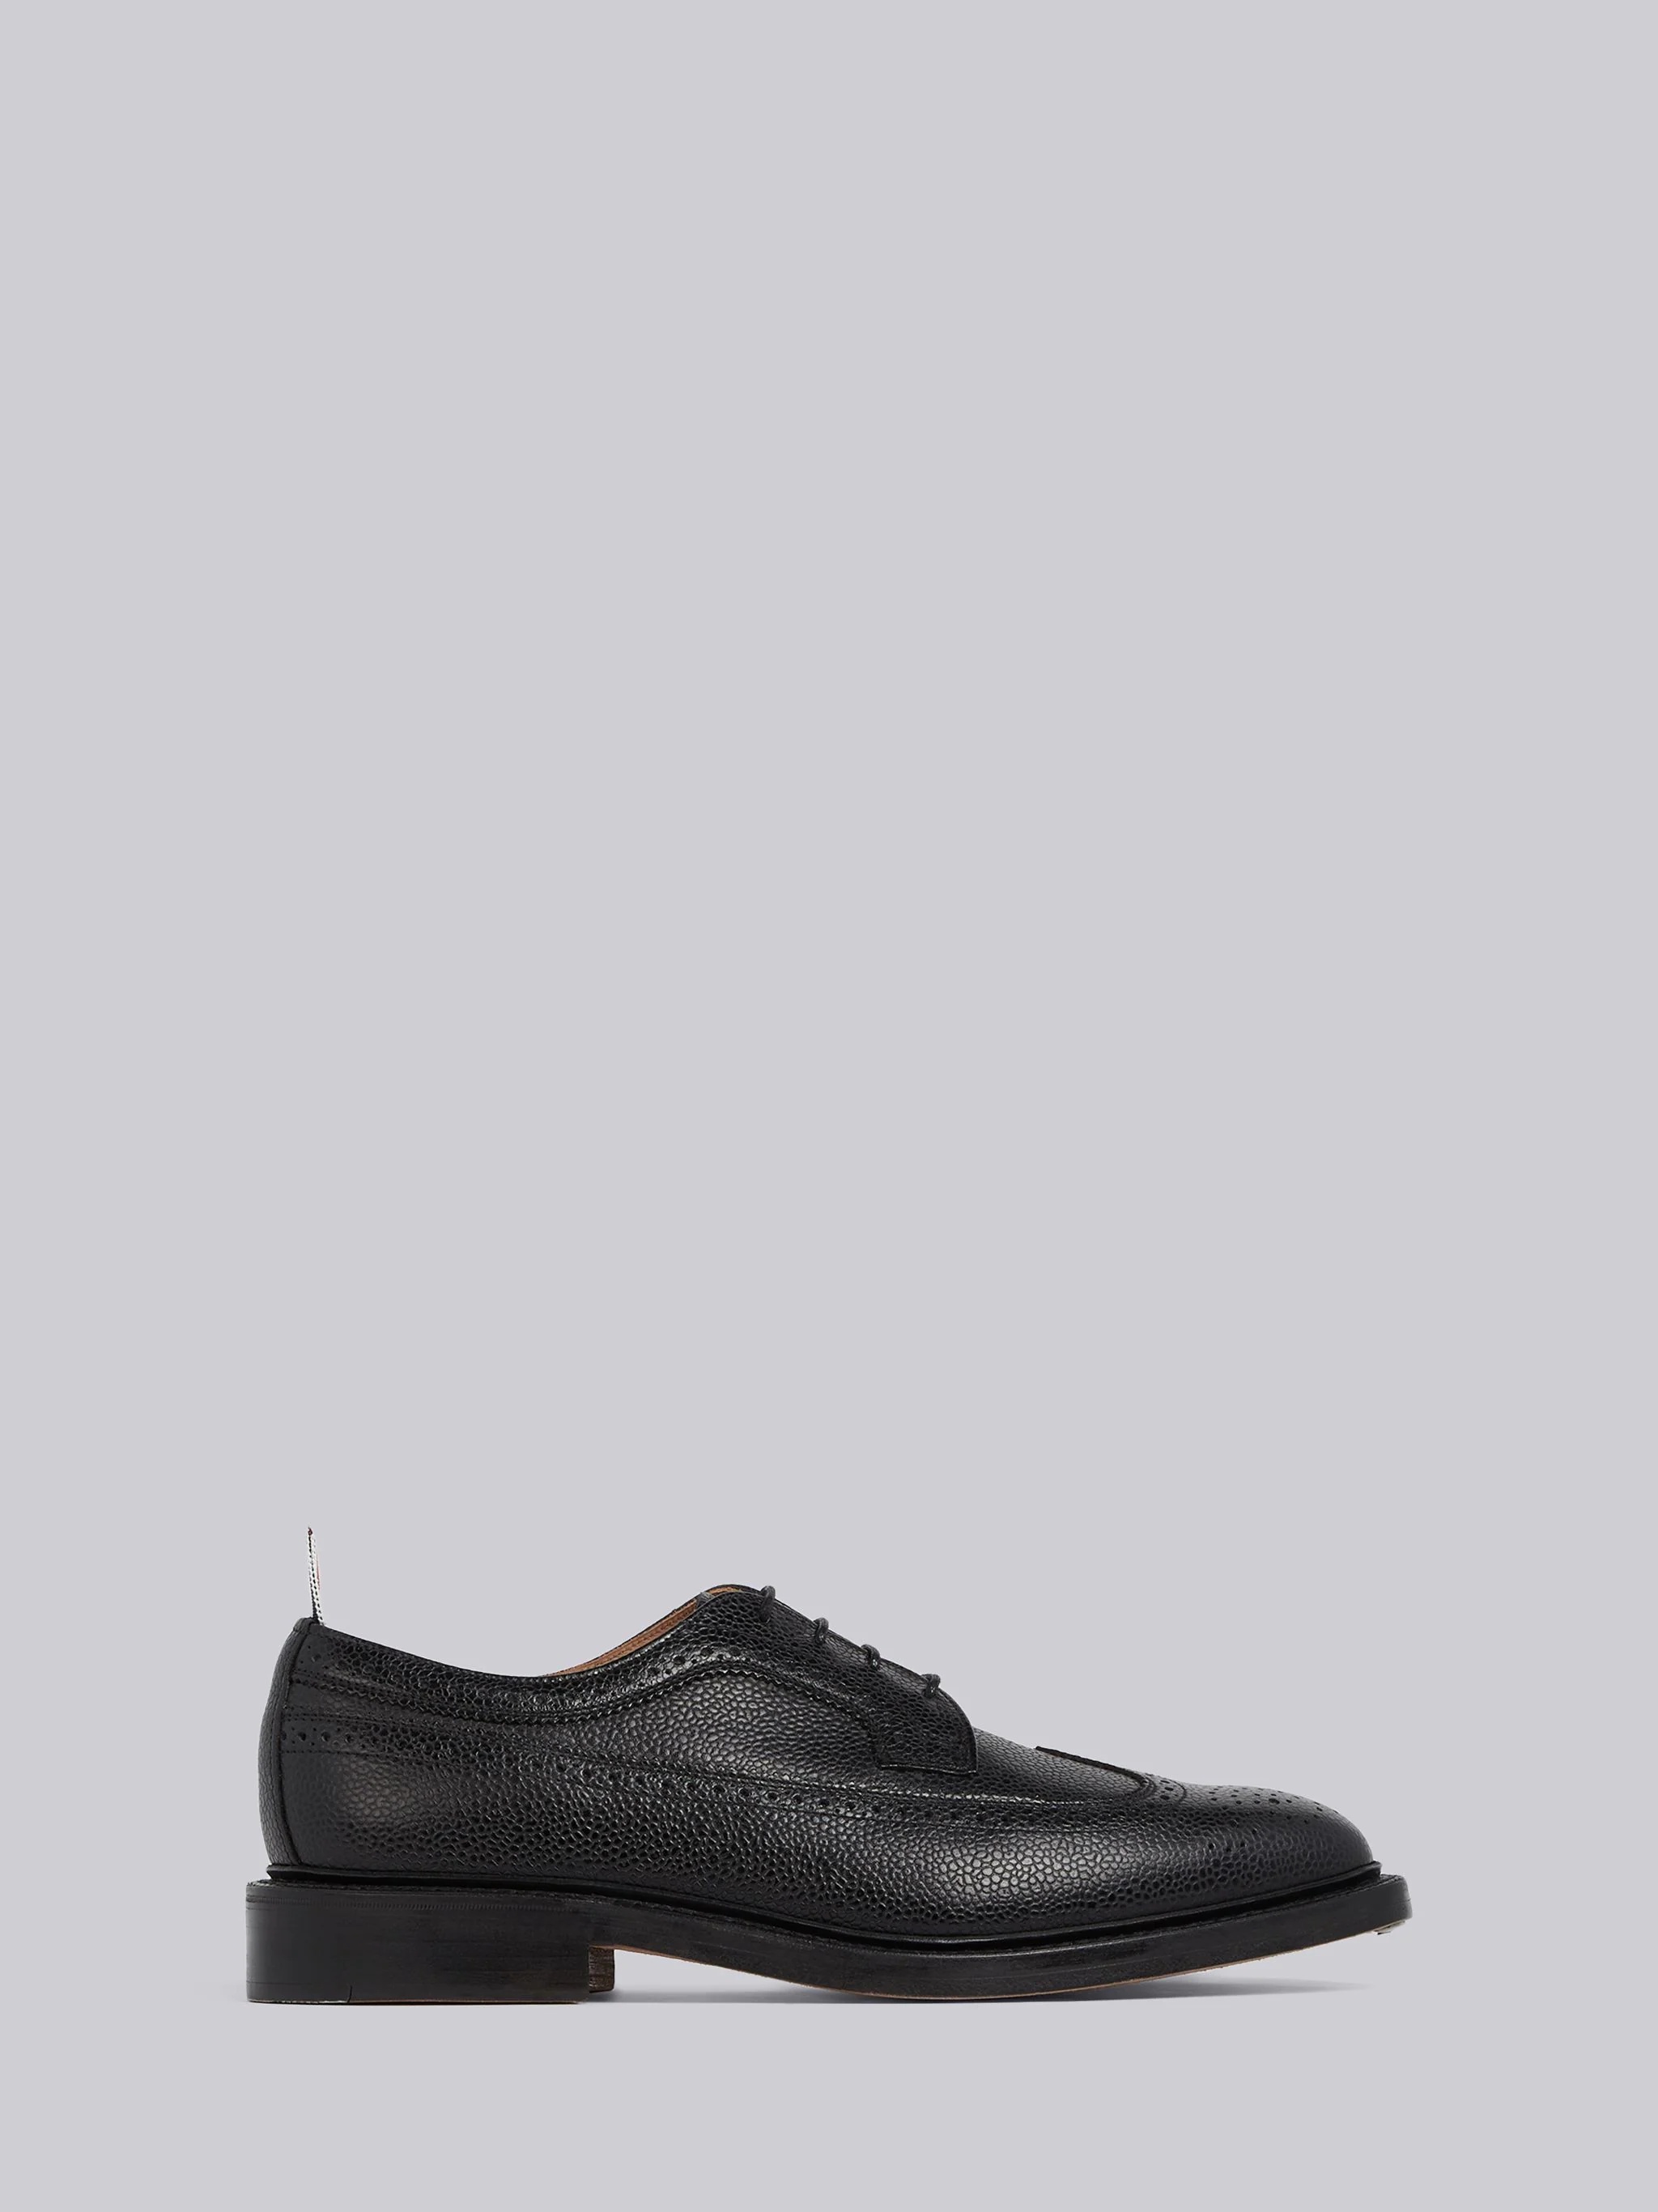 Black Pebble Grain Classic Longwing Brogue With Leather Sole - 1